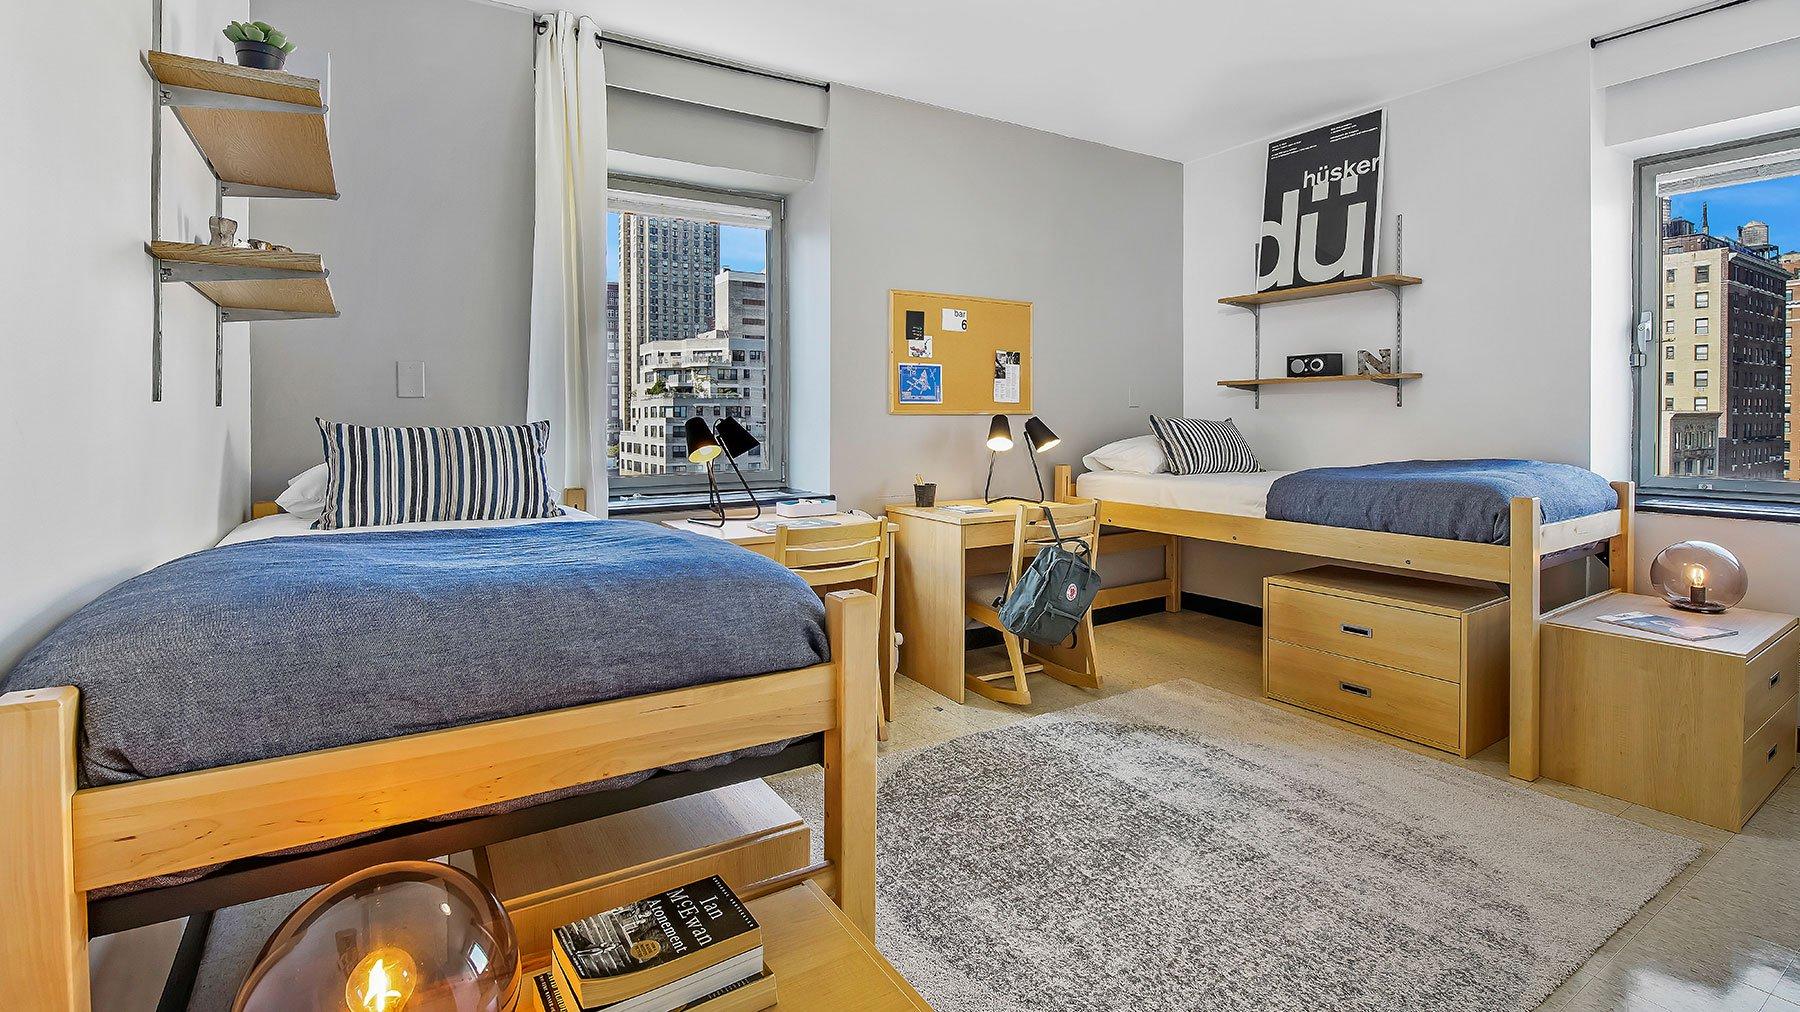 Off campus apartment rentals for students in NYU